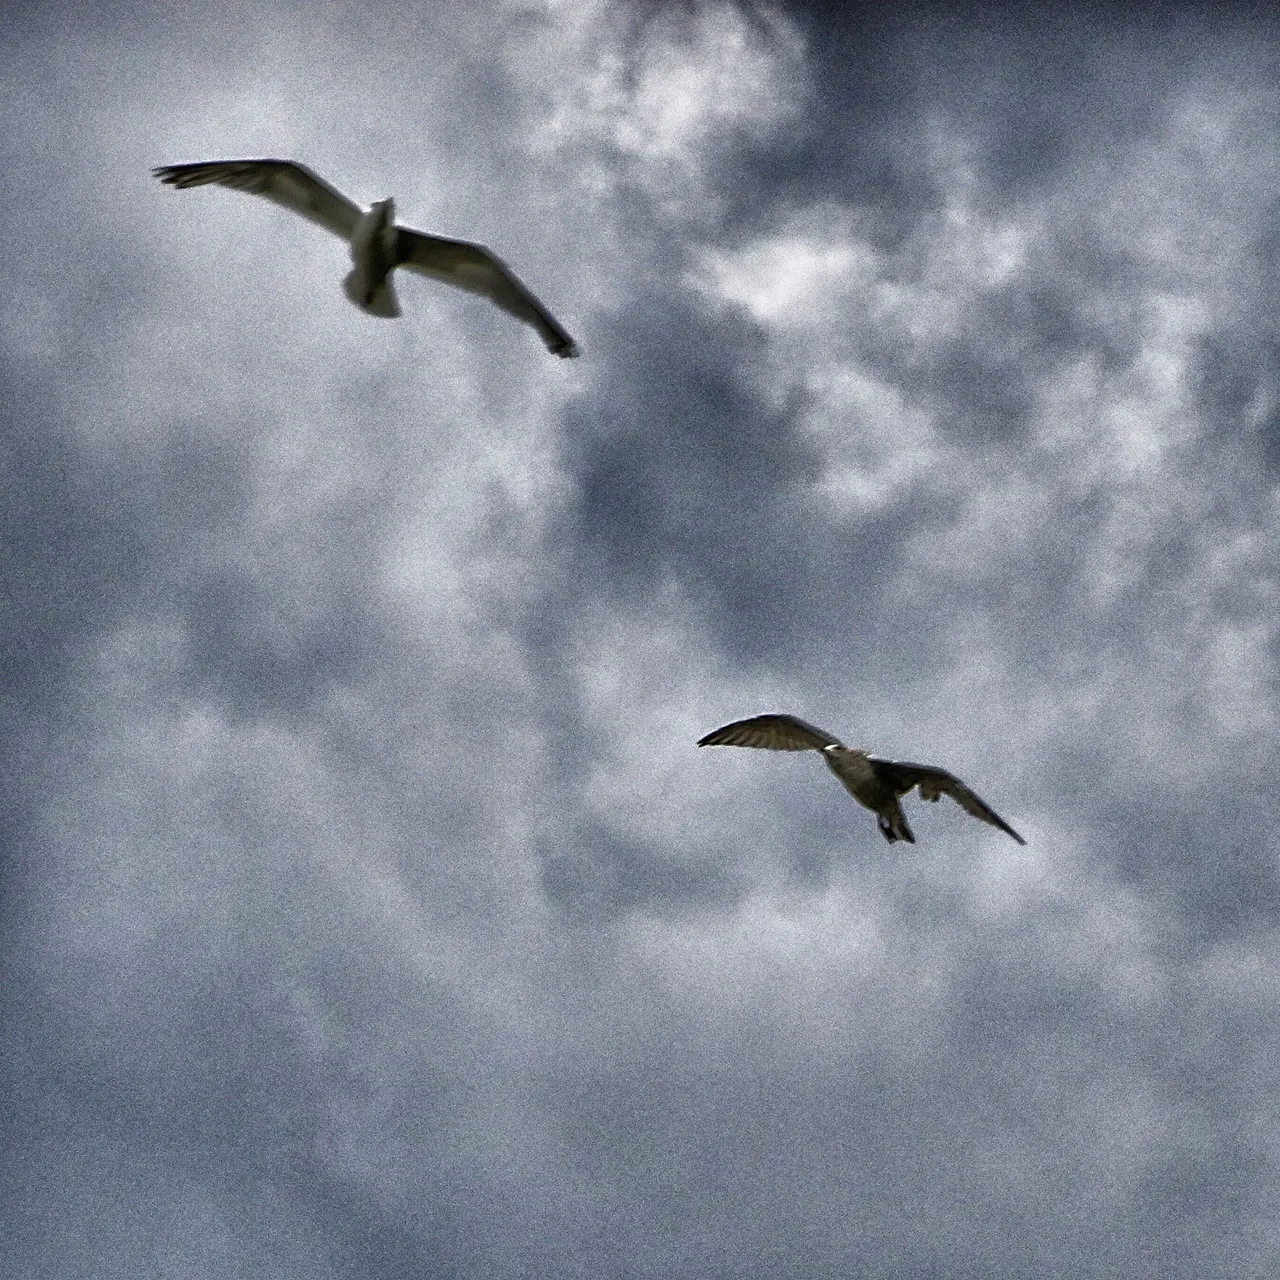 Two birds on a cloudy sky